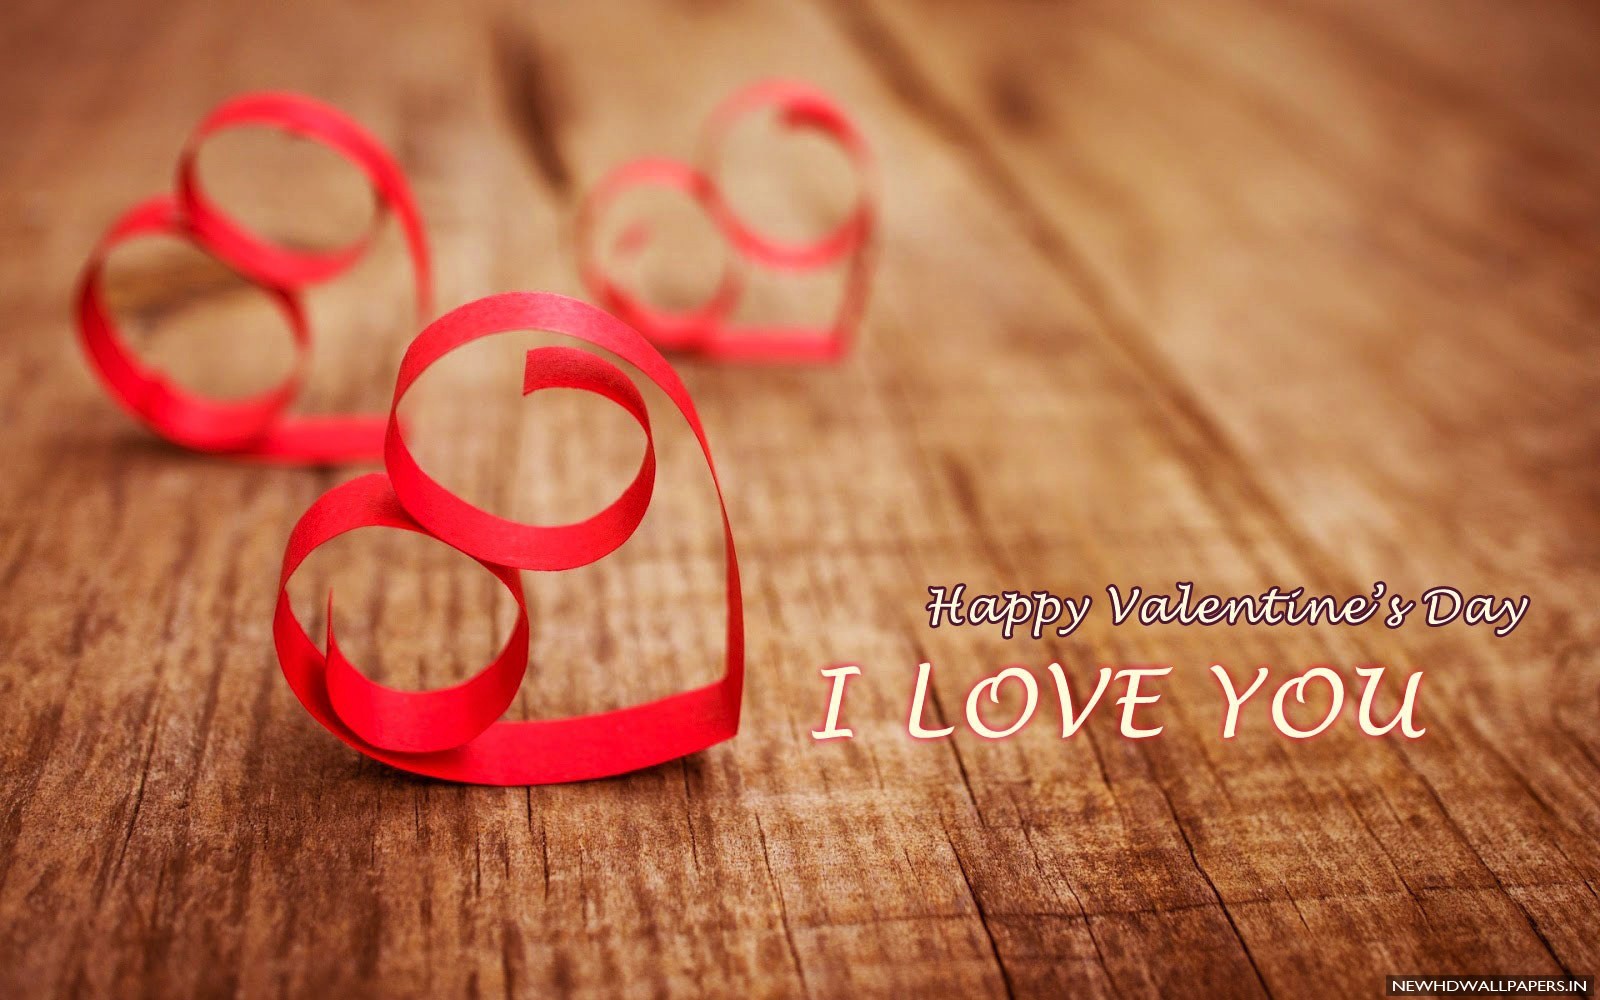 HD Love Is U Wallpaper Pictures To Pin